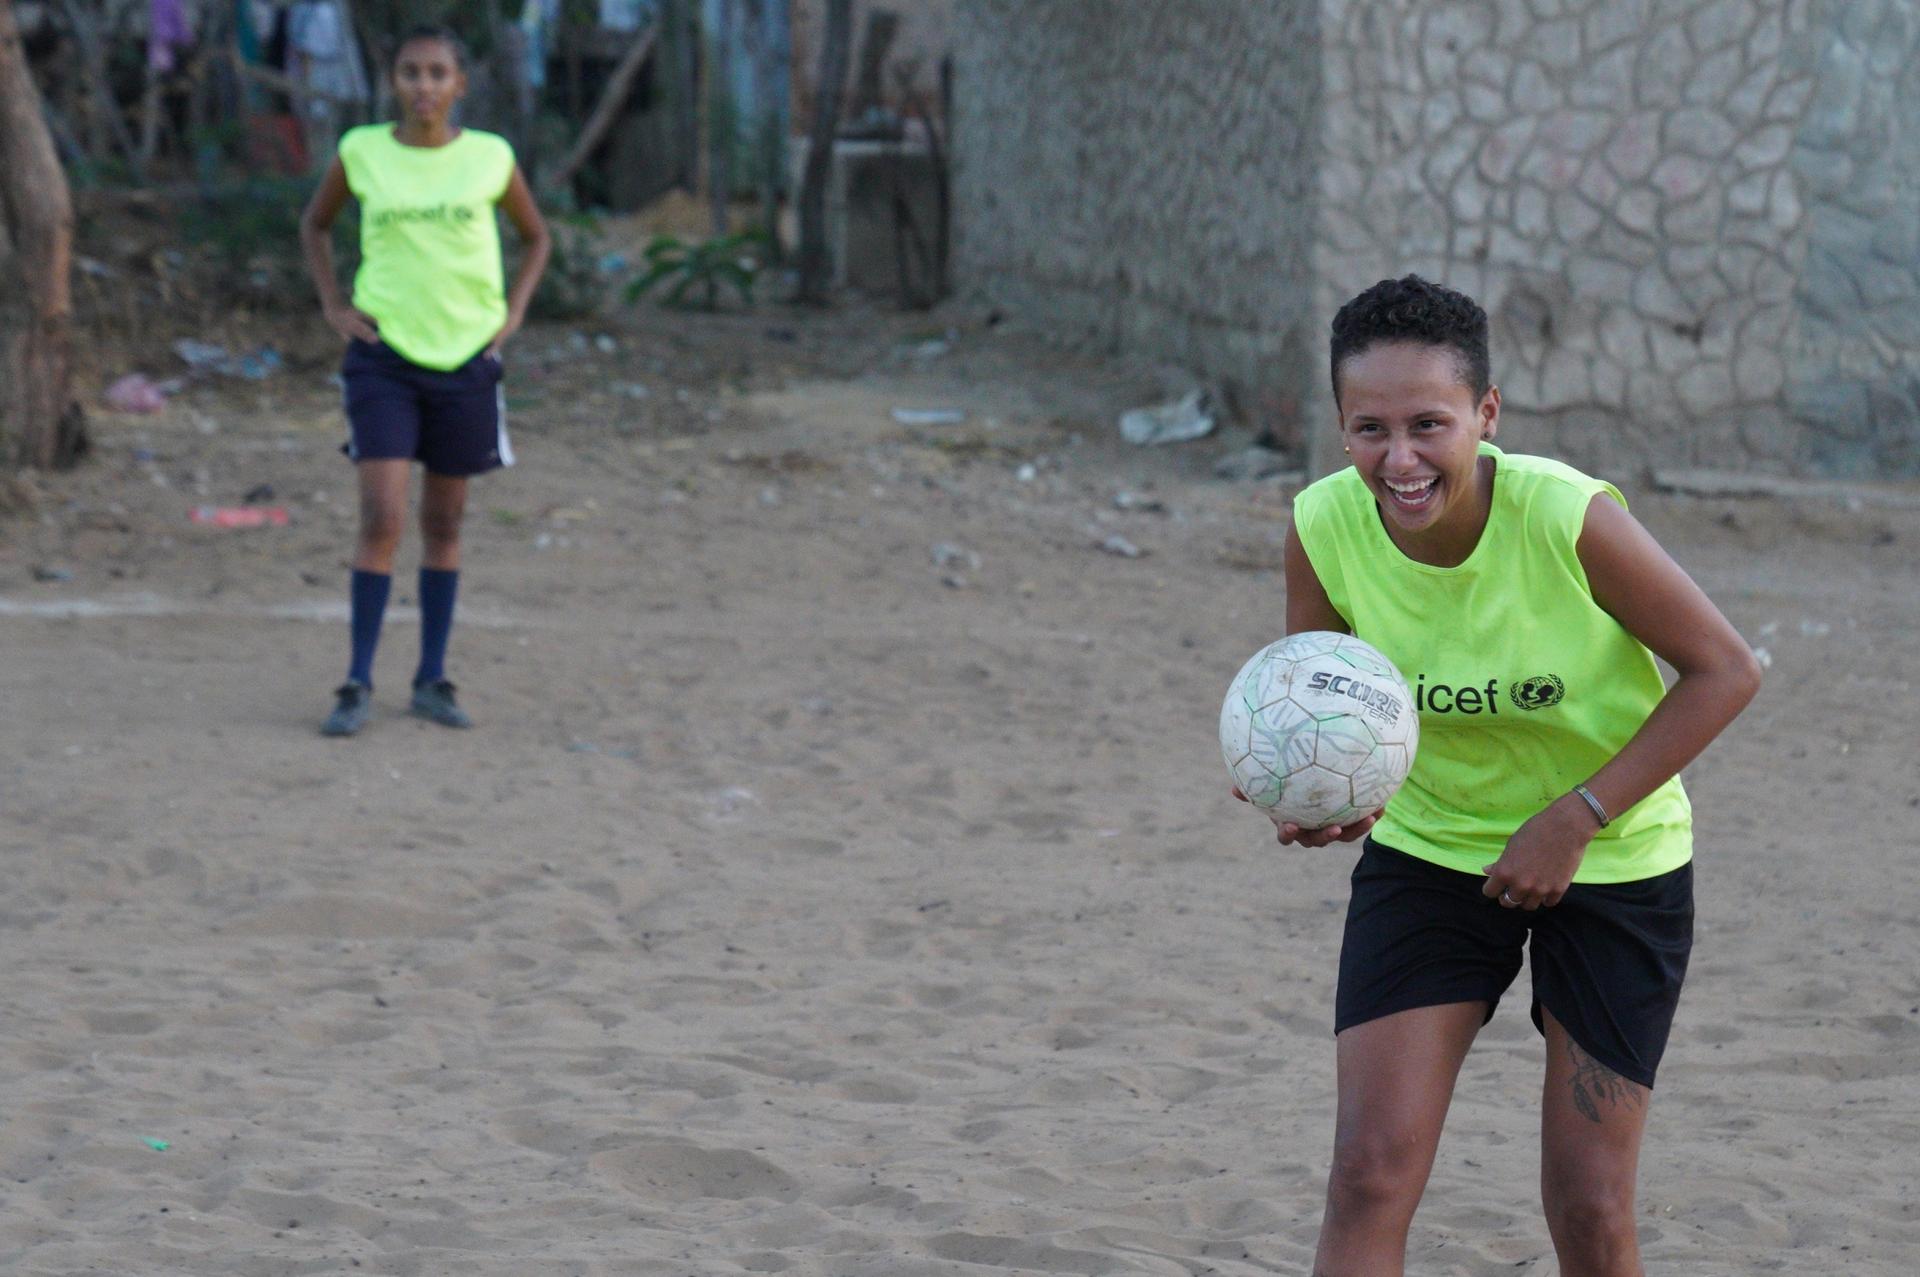 Maria Isabel Parra, 21, says that playing kick ball helps her to meet new people and deal with some of the stress that comes with being an unemployed migrant.